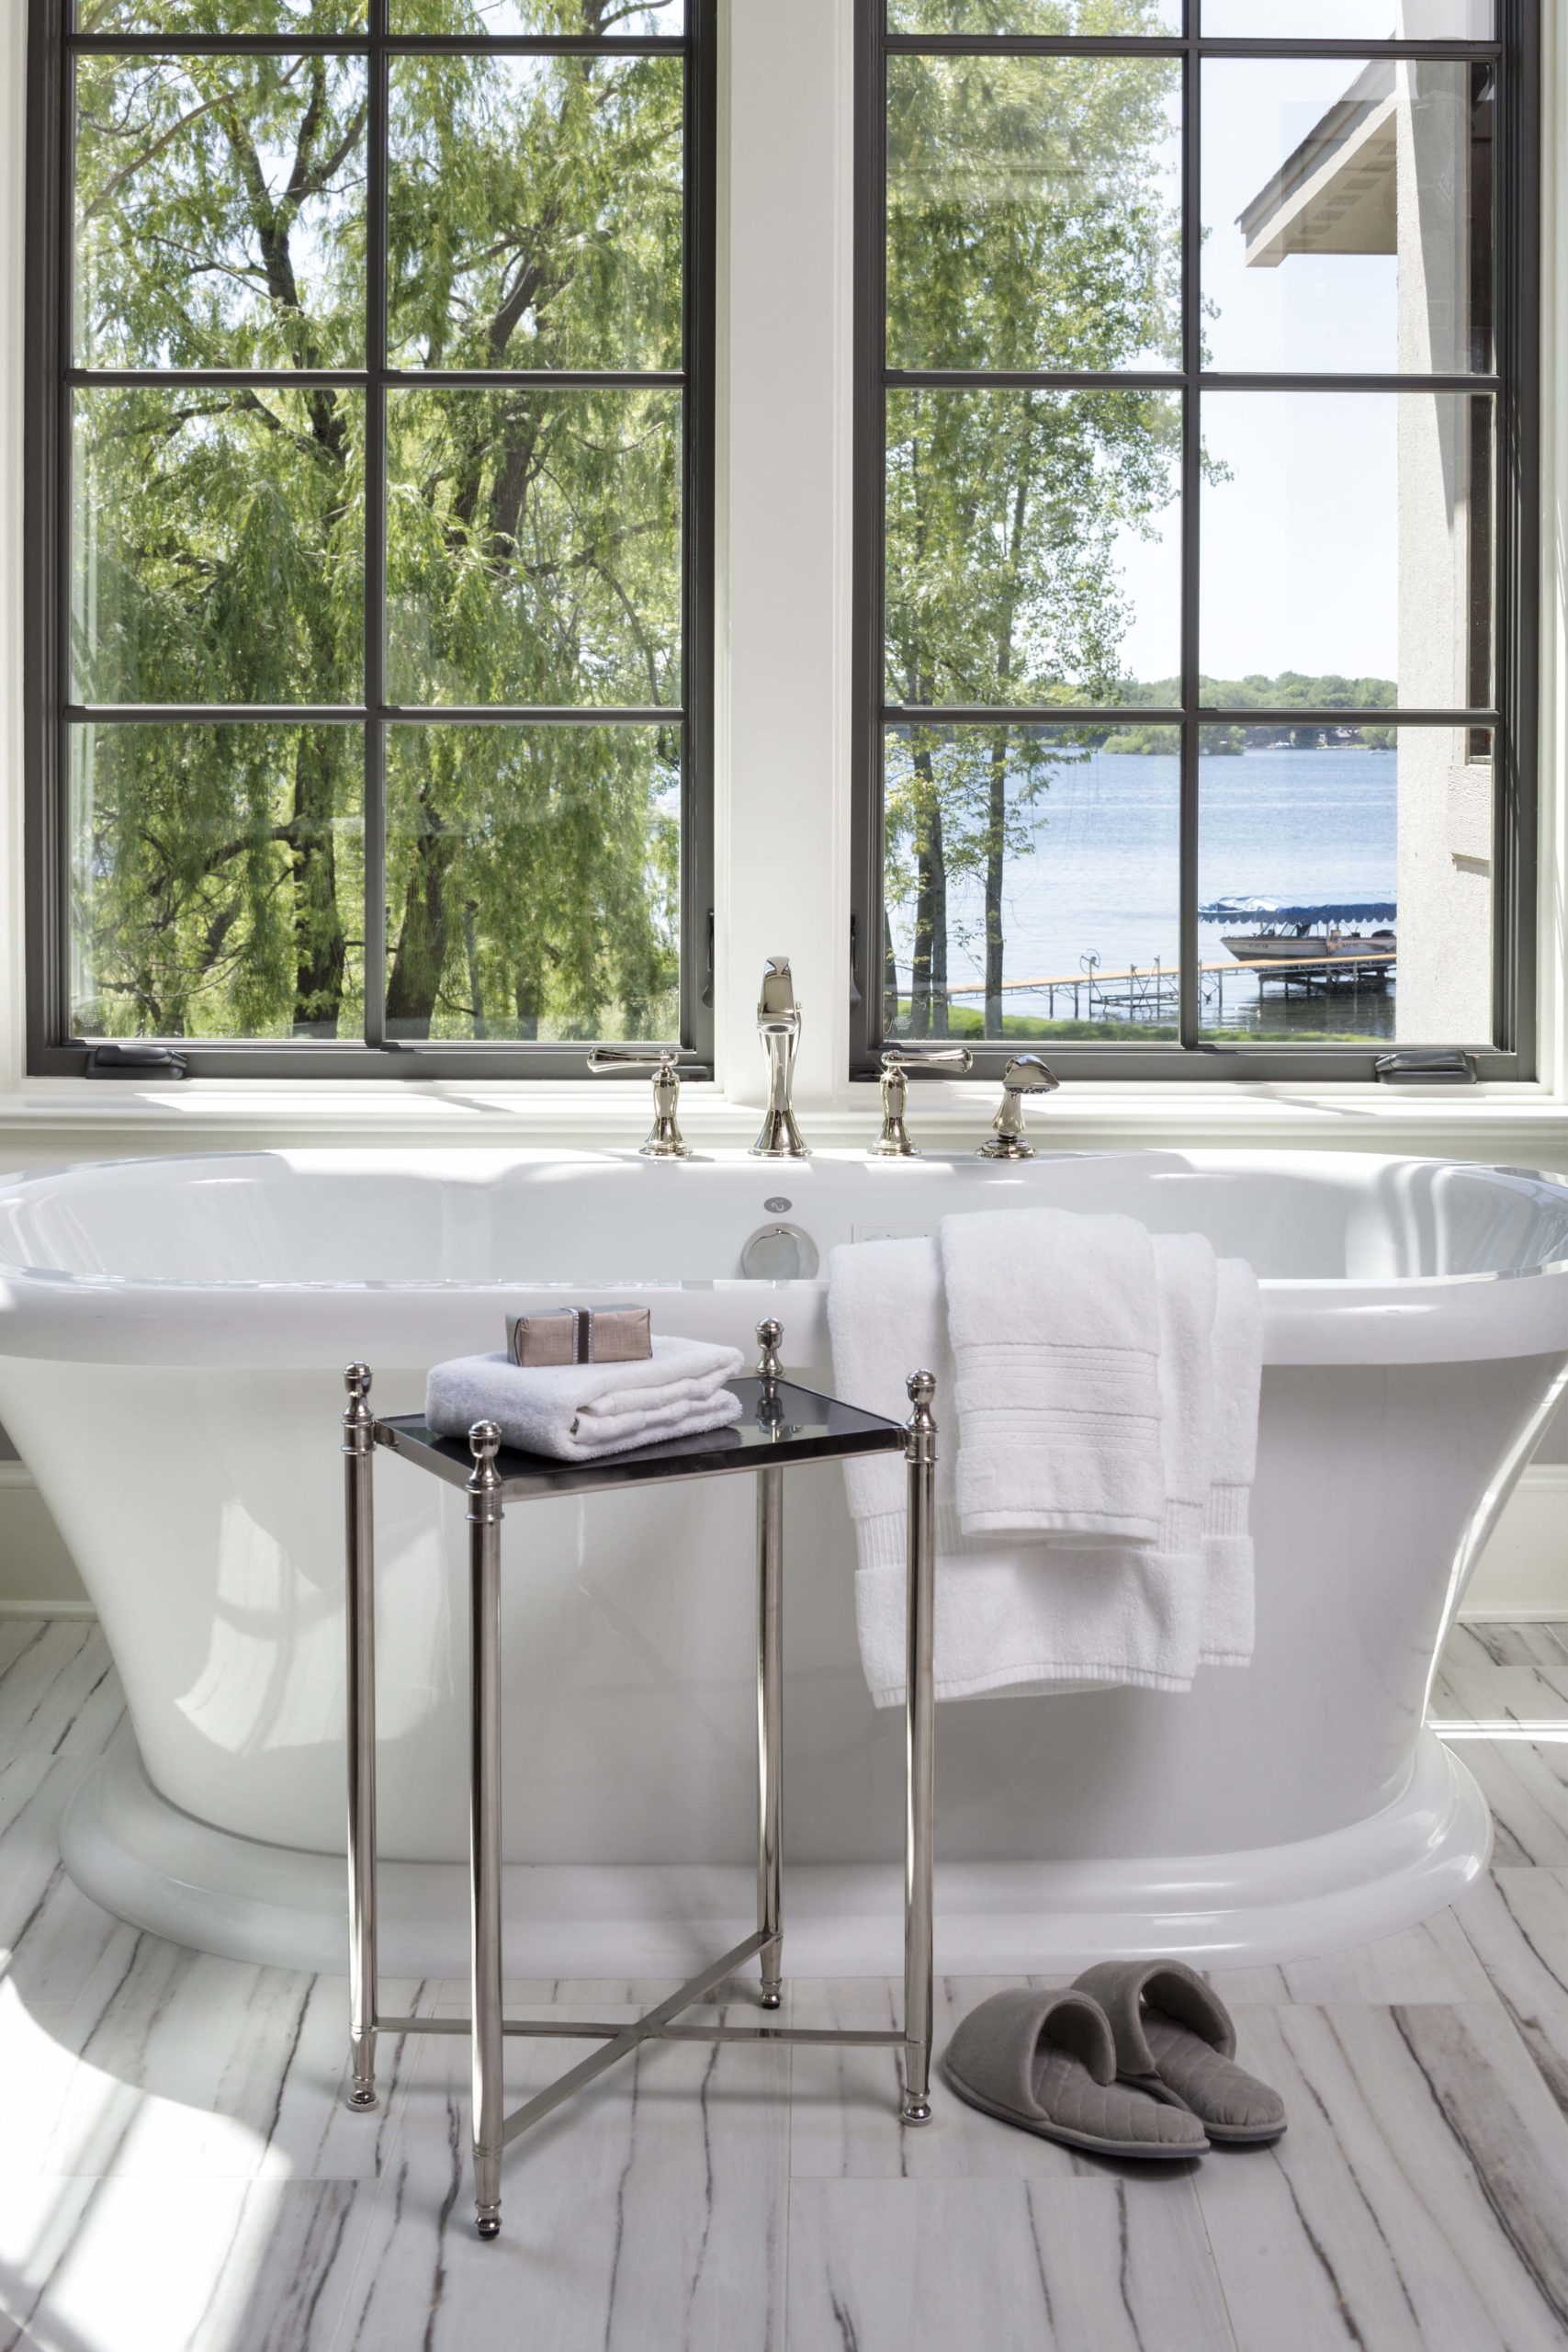 A white bathroom with a large window overlooking a lake.